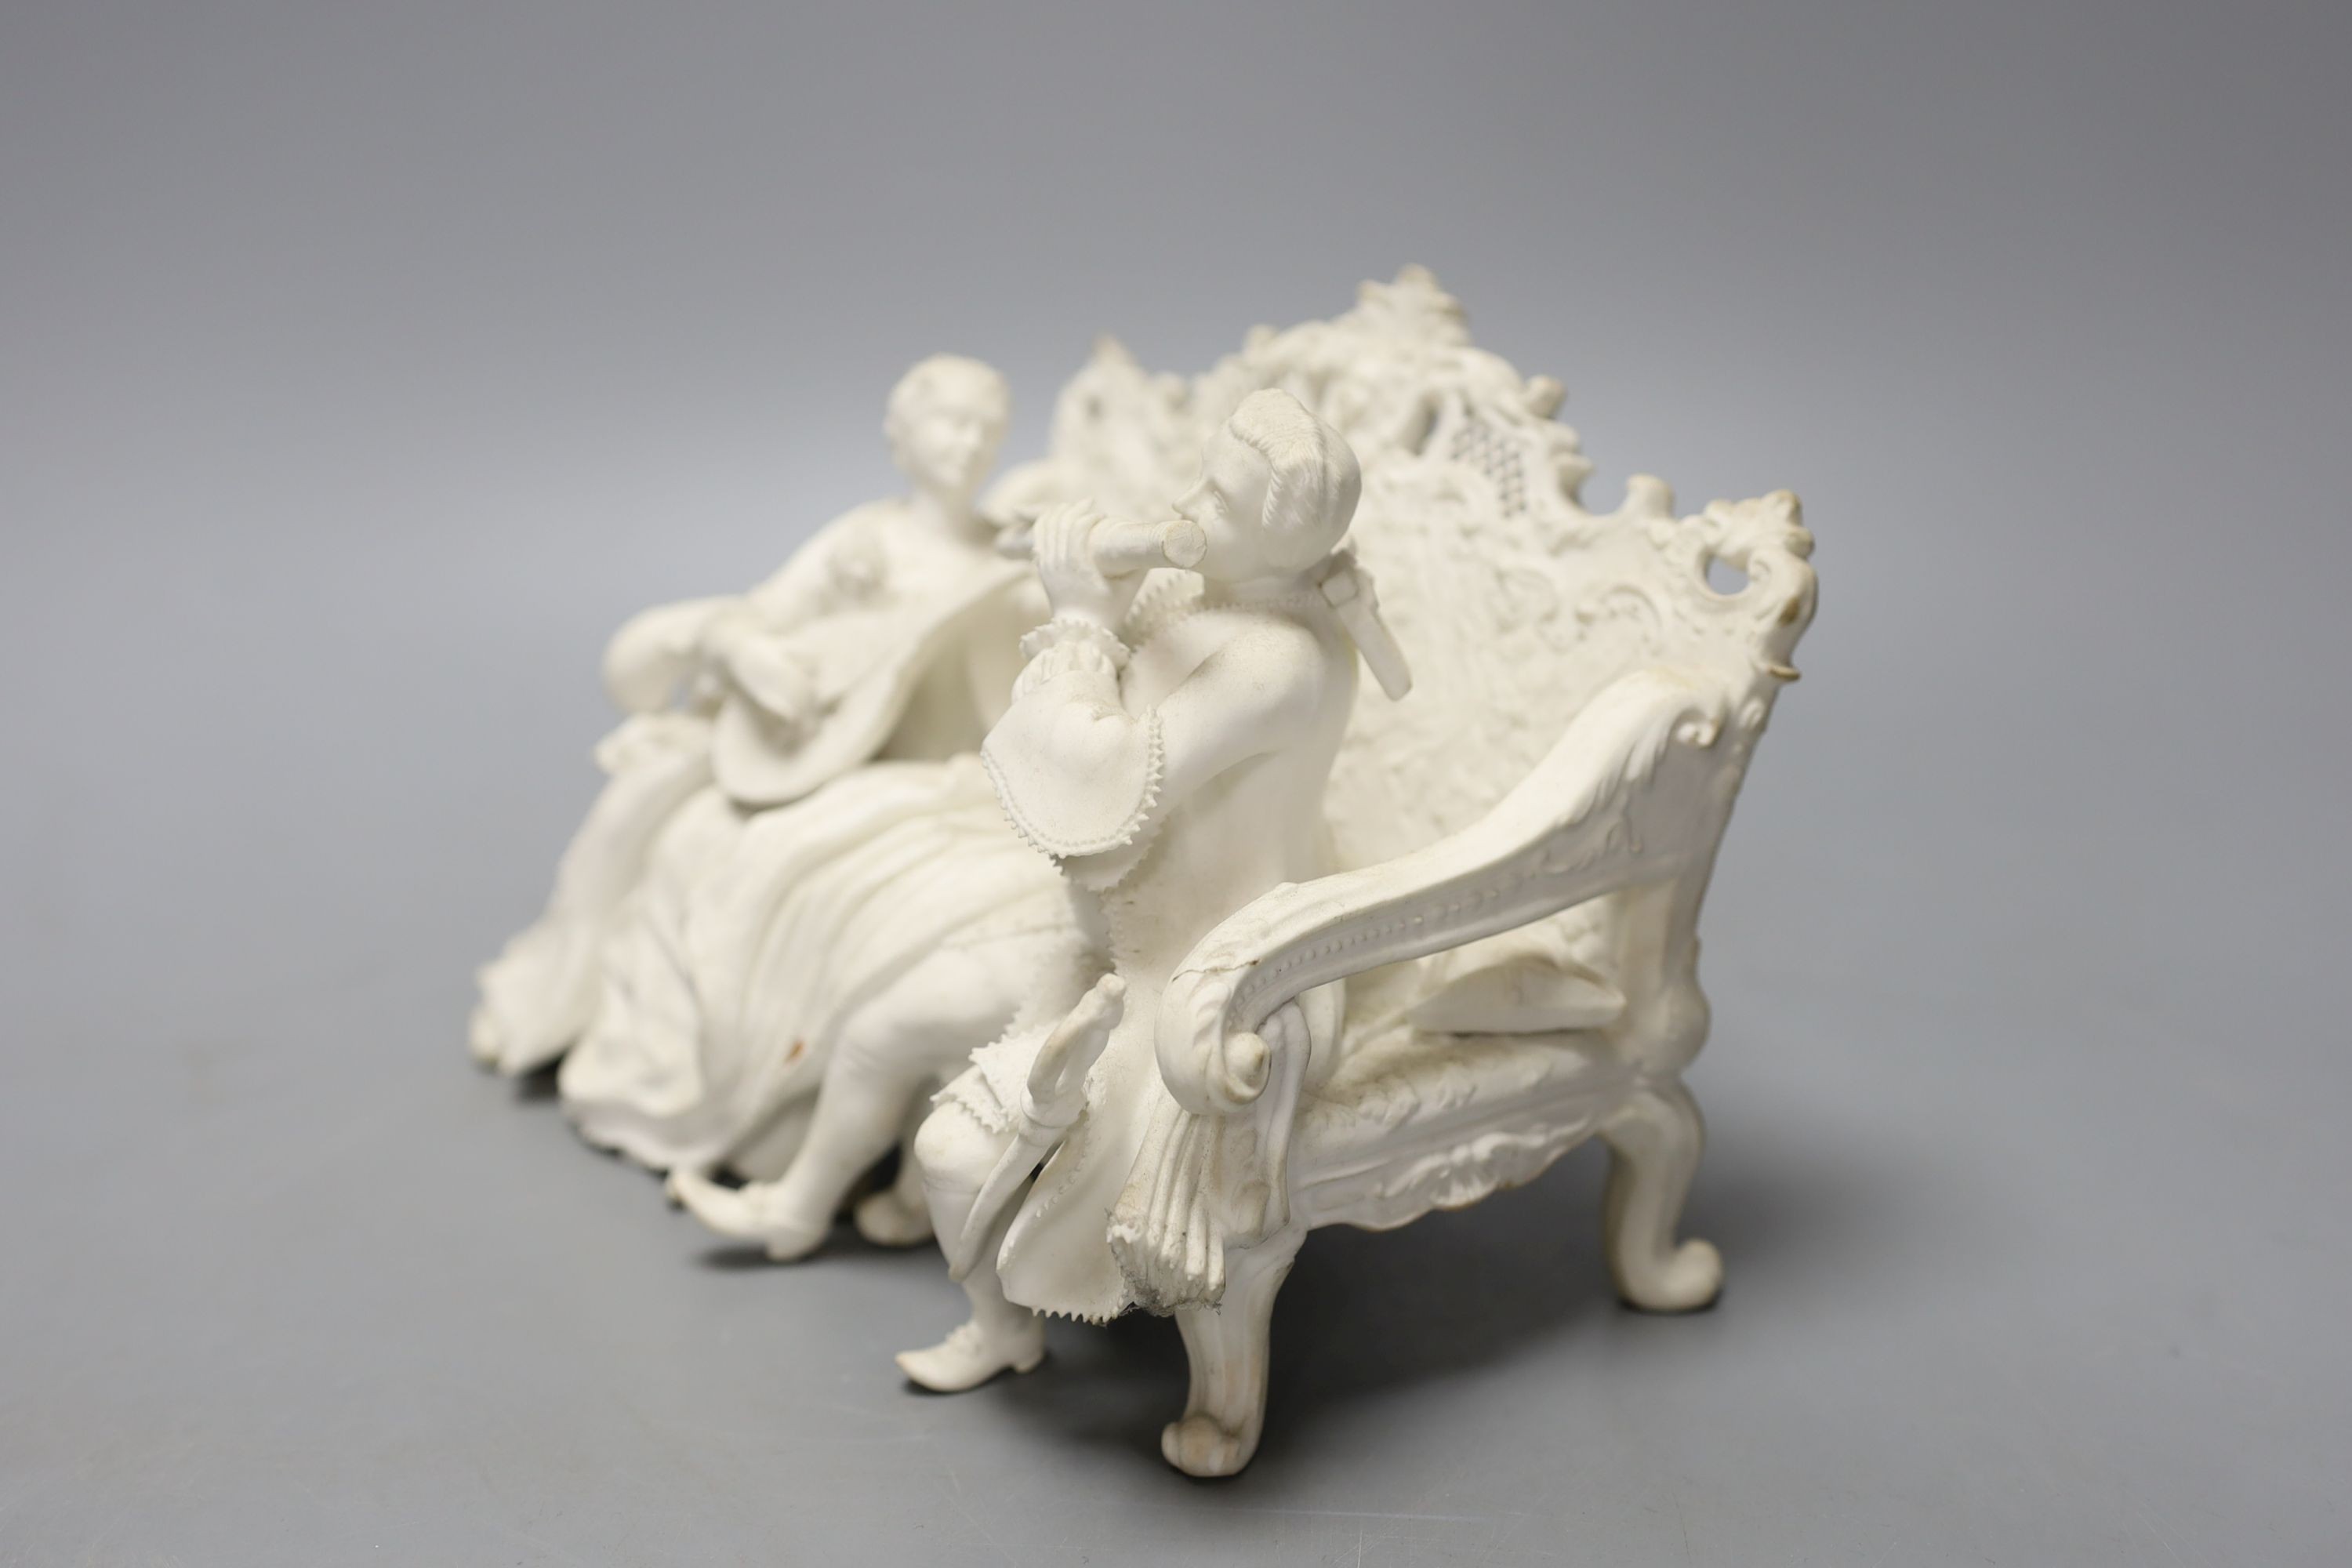 19th century English biscuit group of a woman with a mandolin and a man with a flute seated on an elaborate settee, 20 cm wide